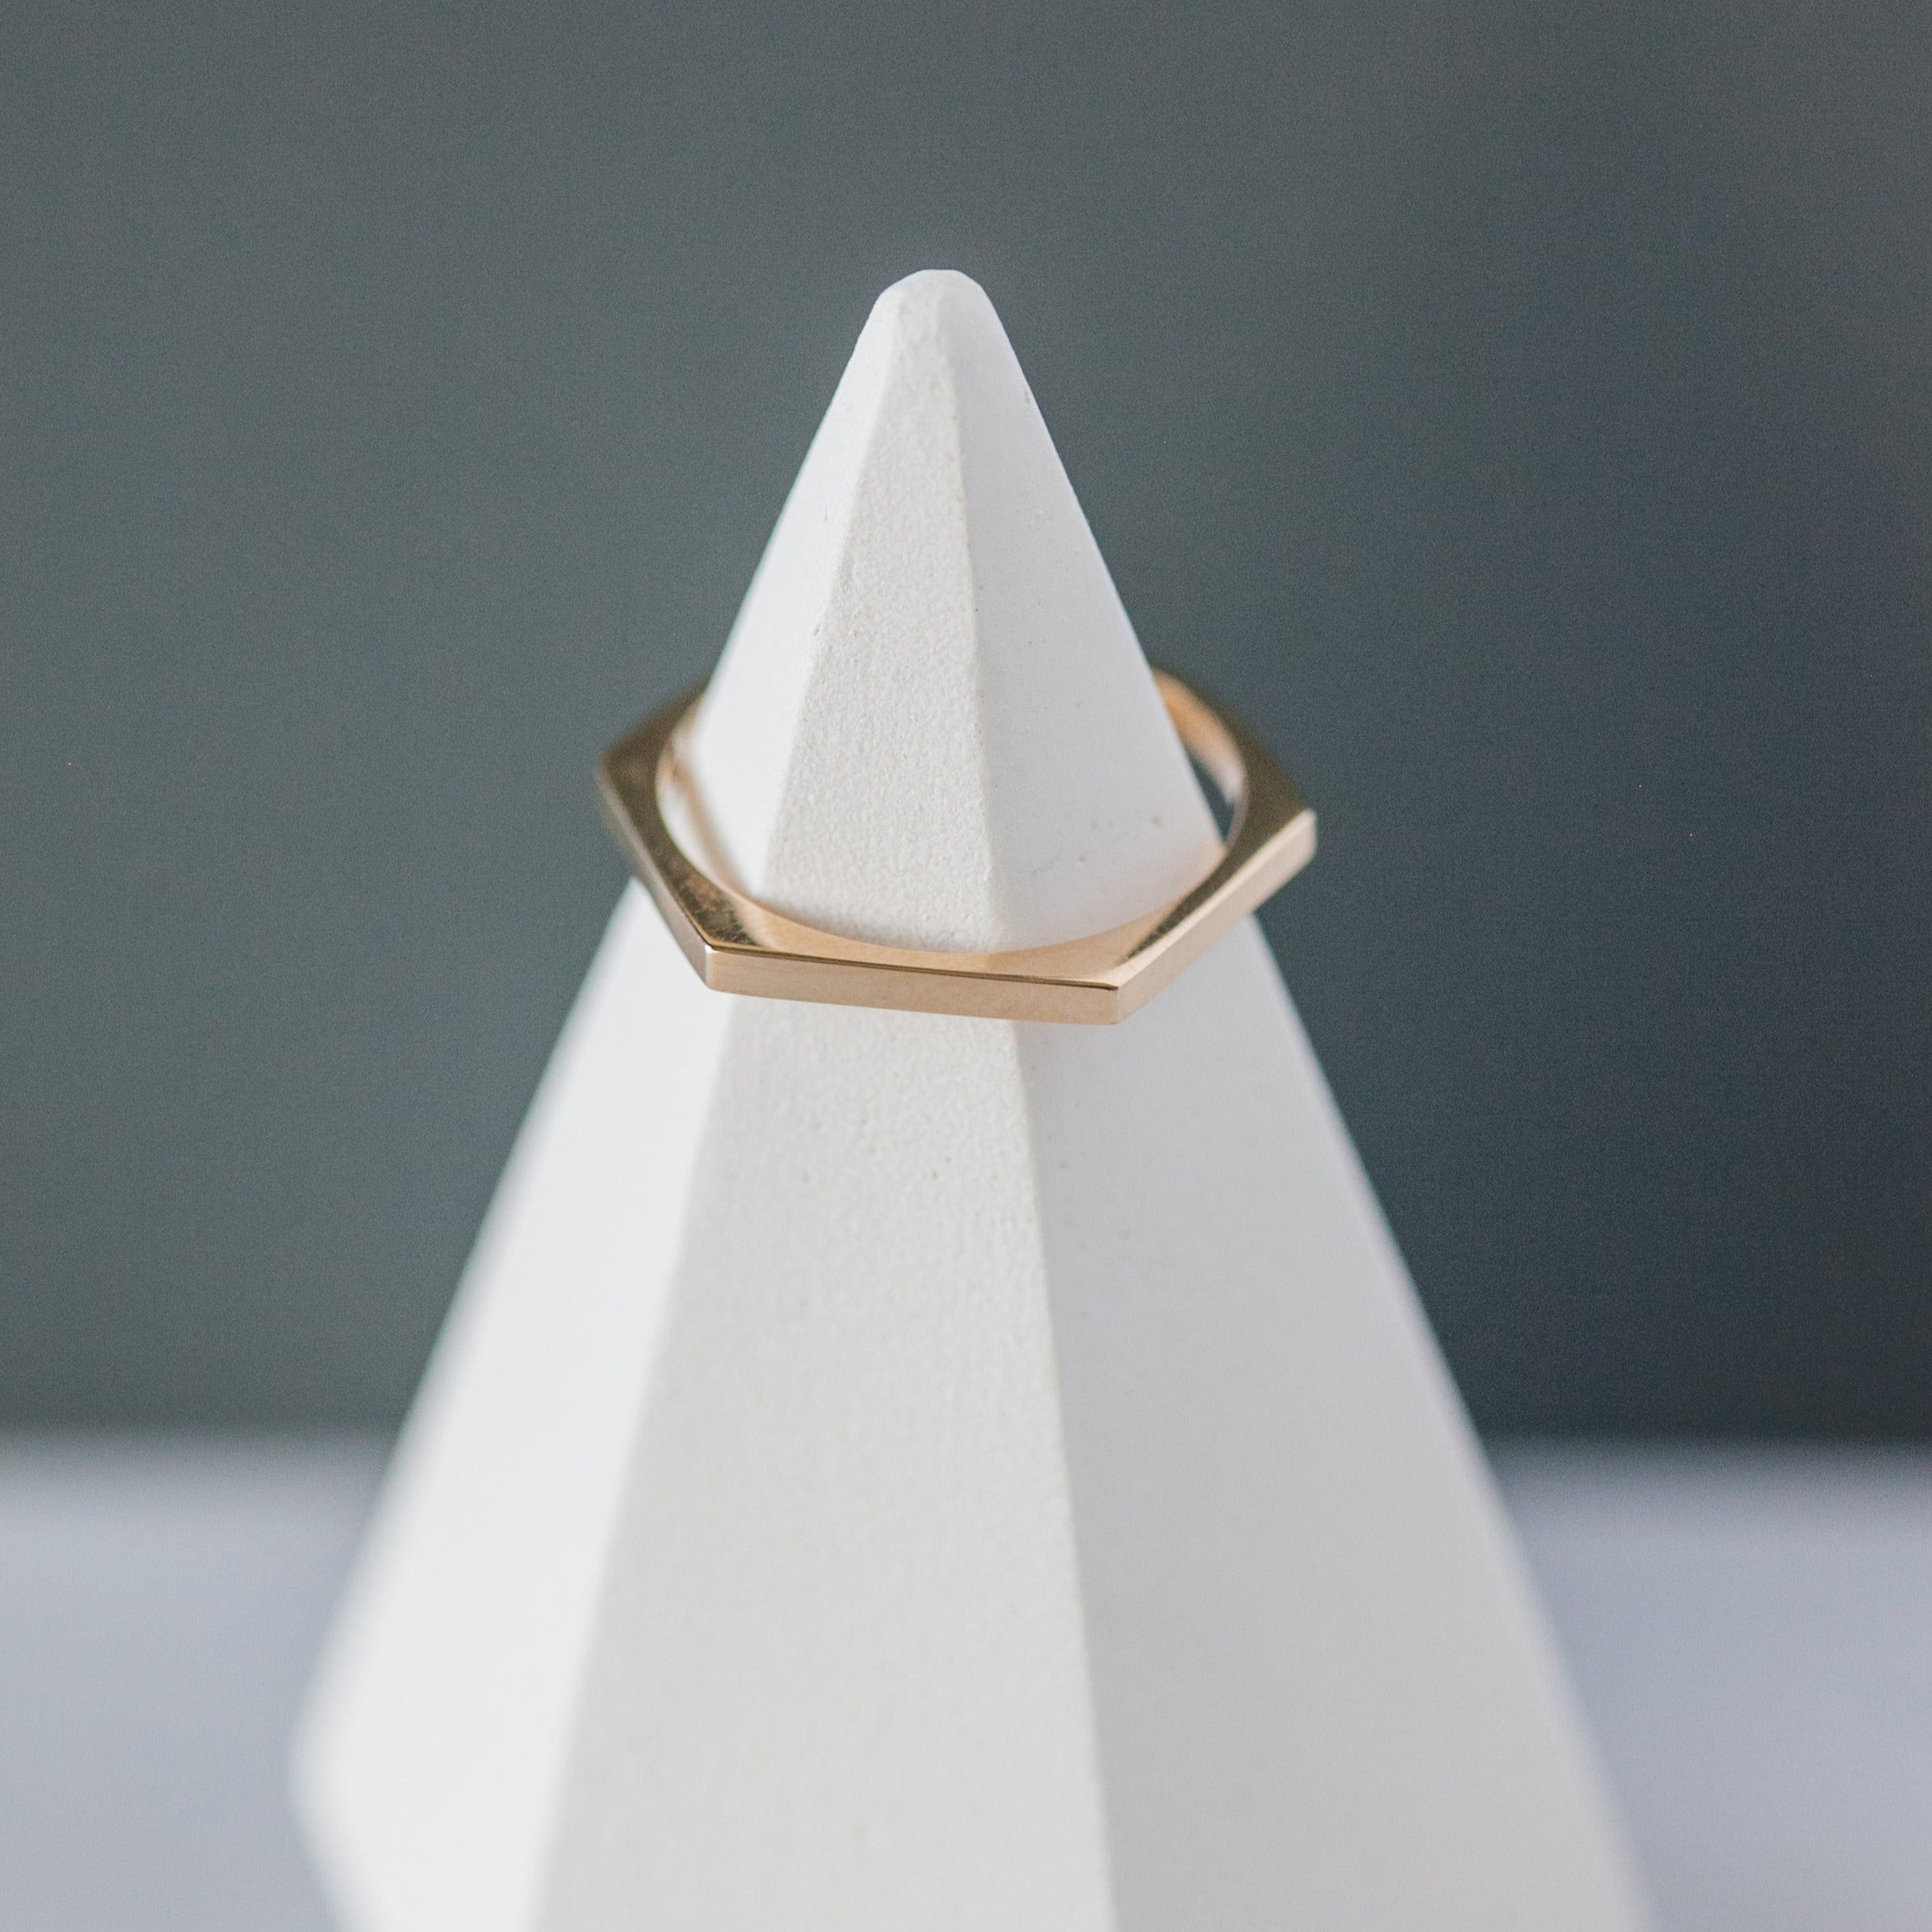 Stackable &quot;Angled&quot; Ring